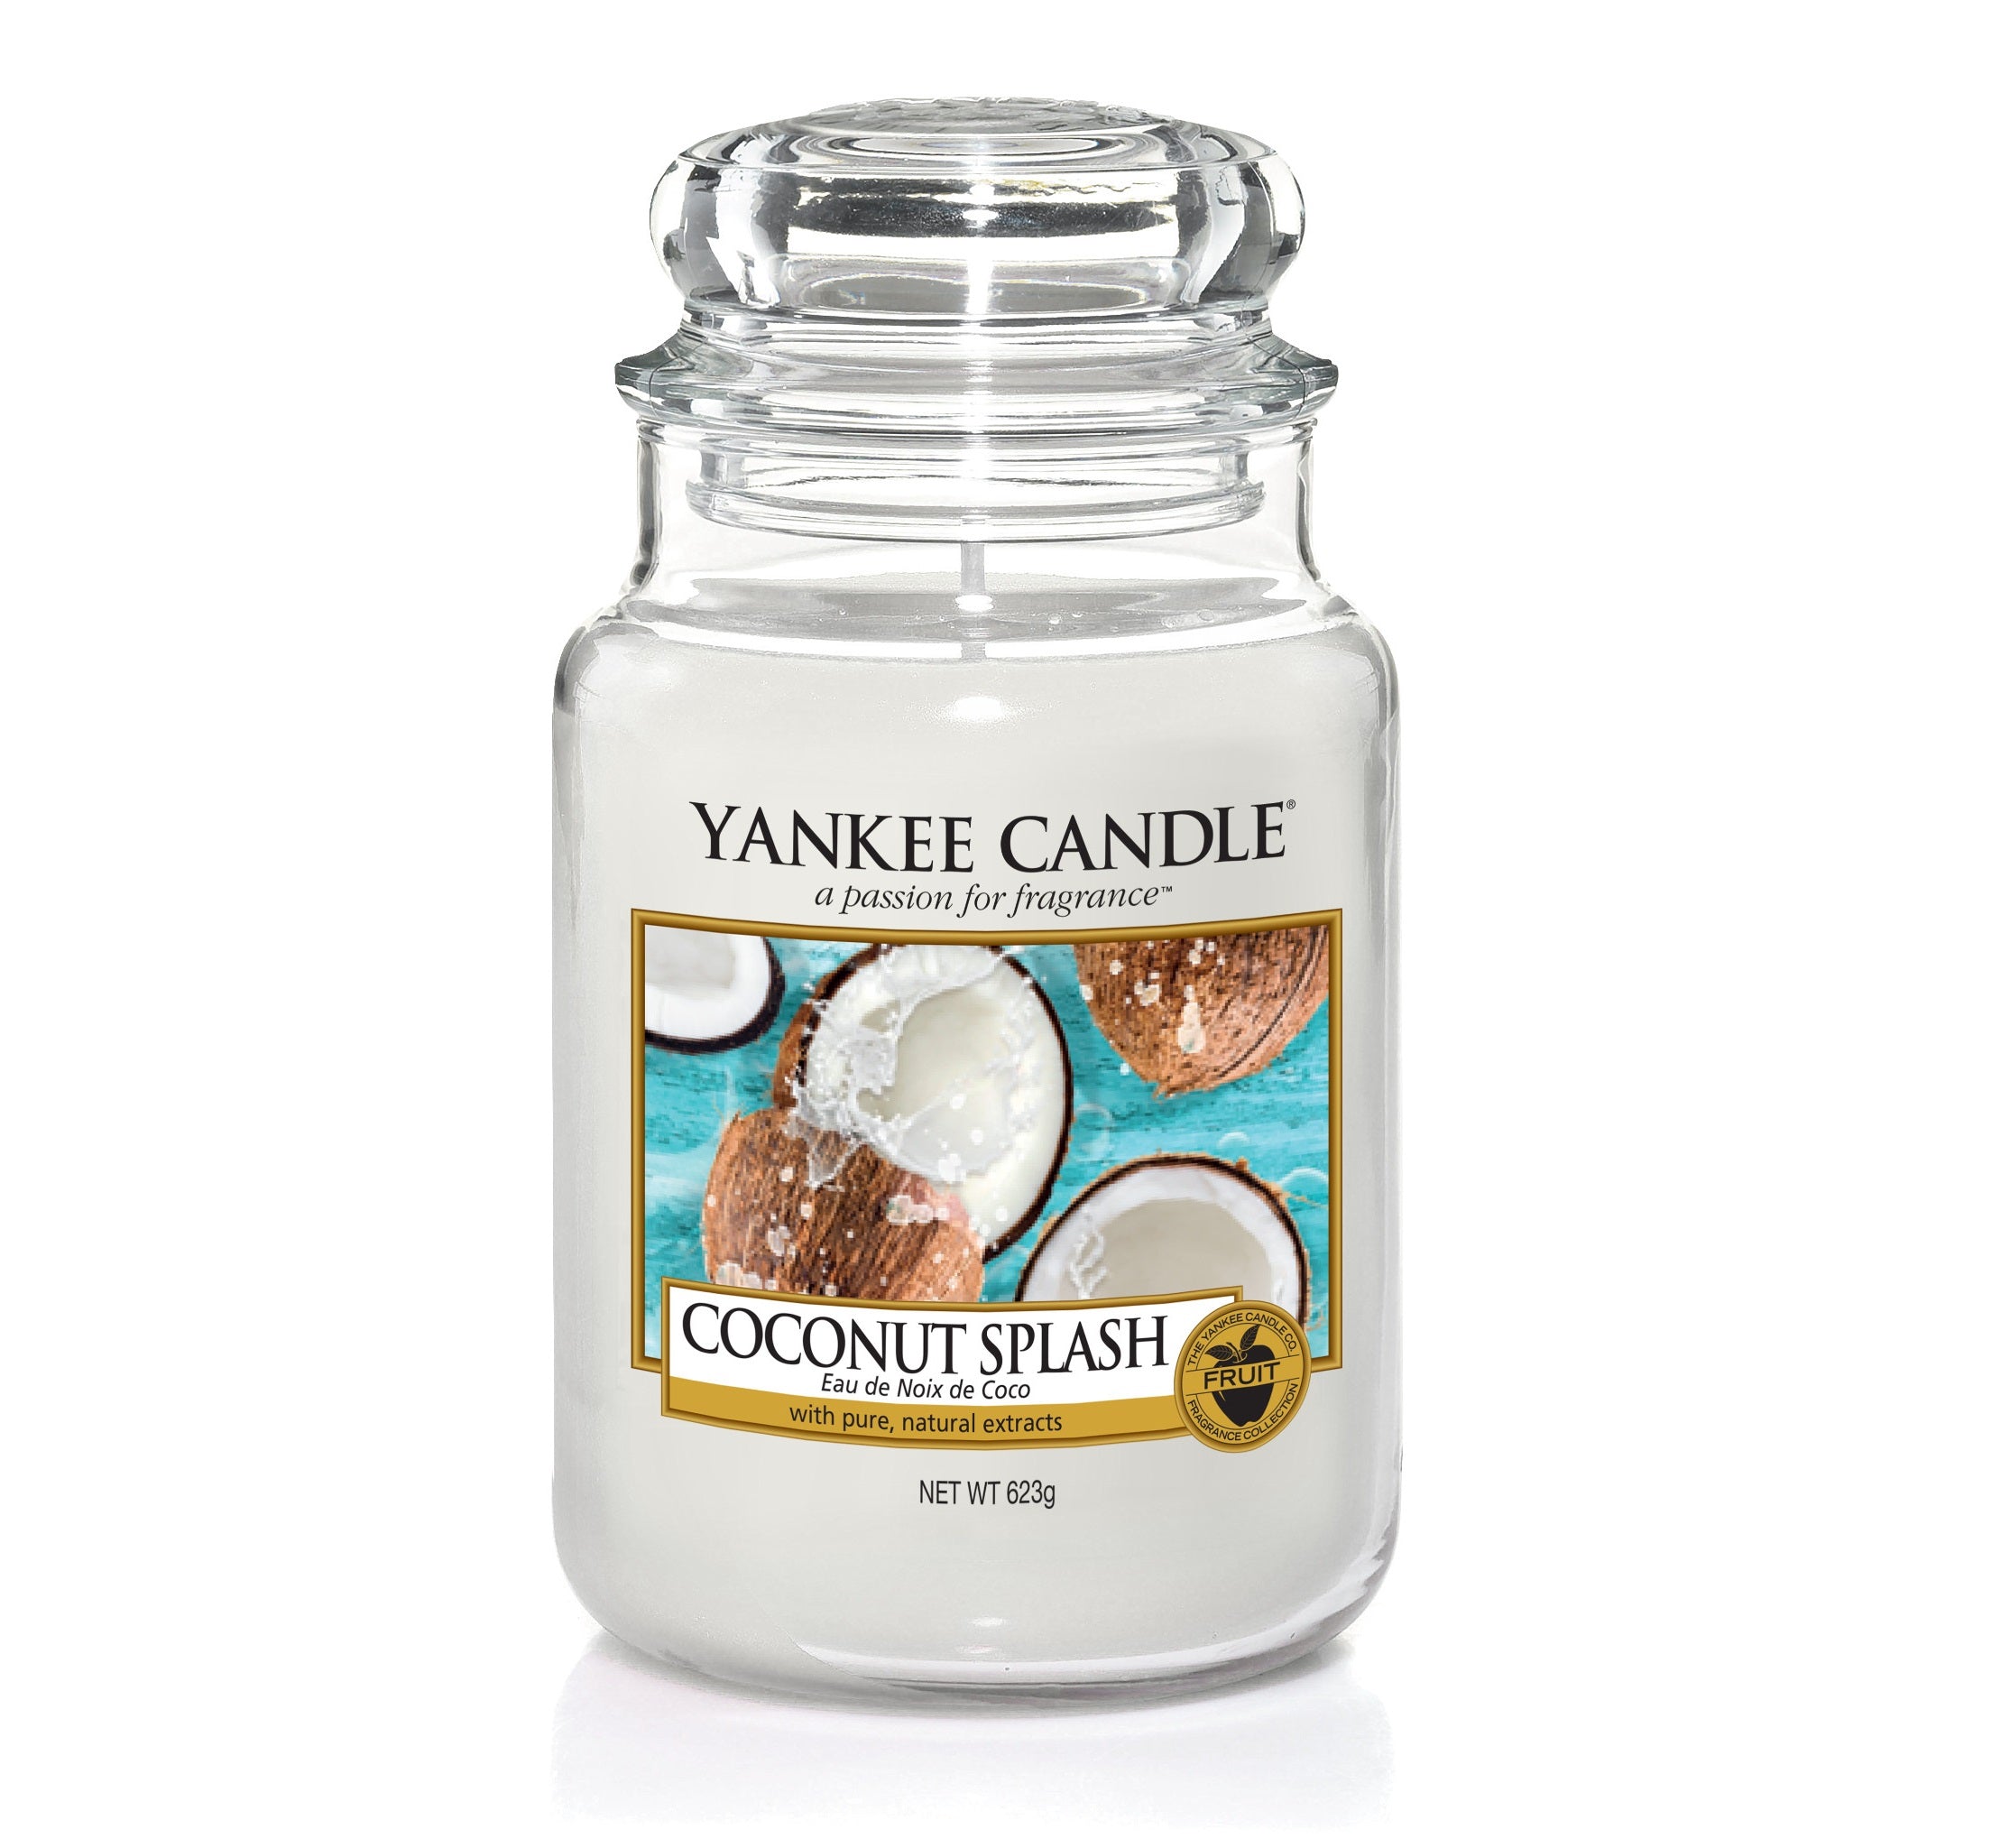 COCONUT SPLASH -Yankee Candle- Giara Grande – Candle With Care